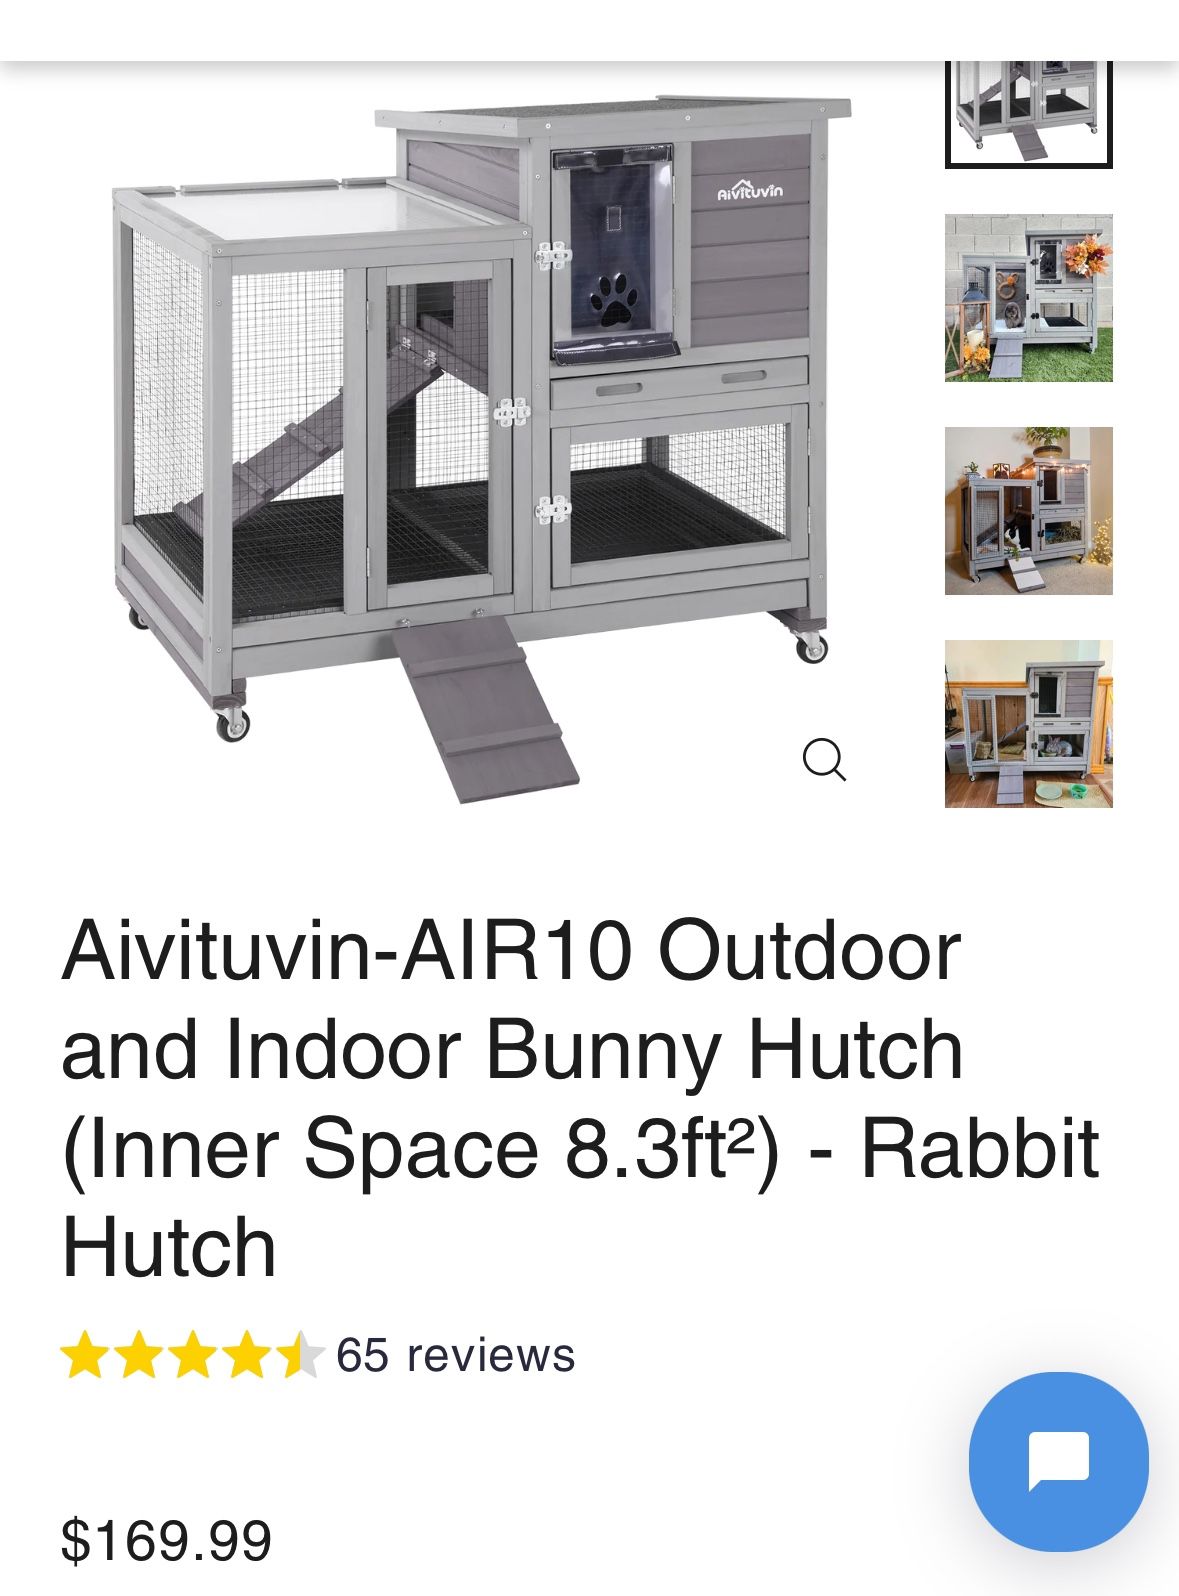 New Chicken Coop Or bunny Hutch